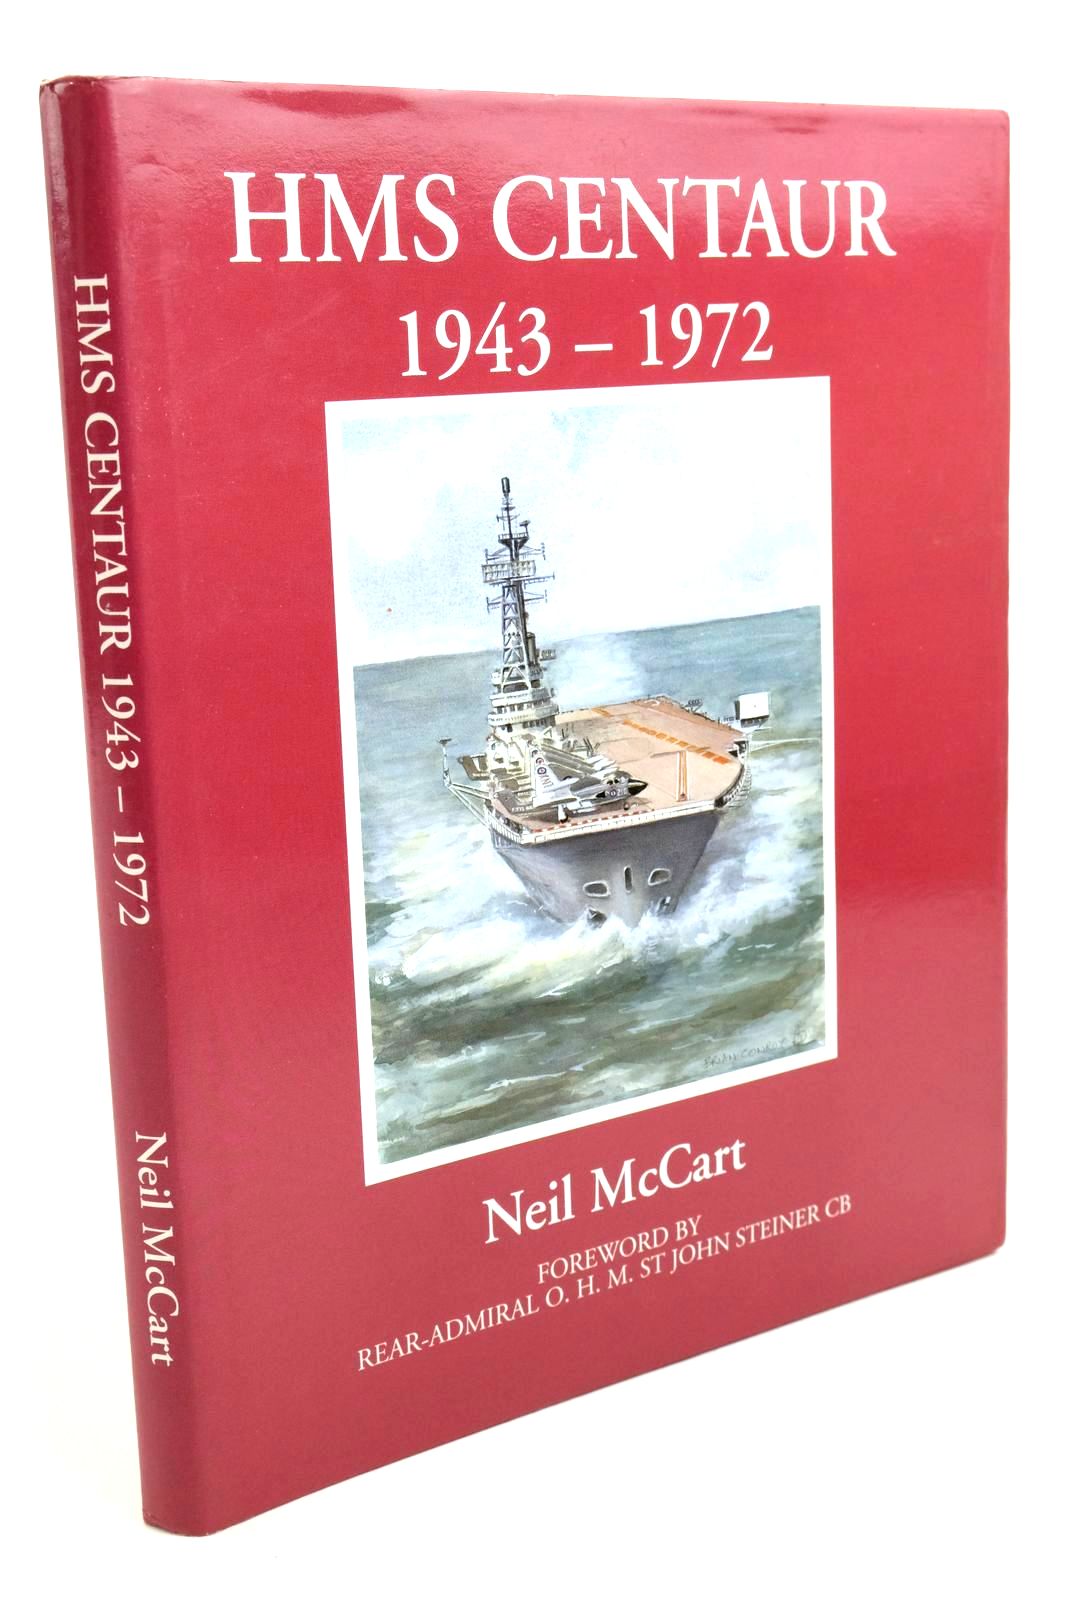 Photo of HMS CENTAUR 1943-1972 written by McCart, Neil published by Fan Publications (STOCK CODE: 1322323)  for sale by Stella & Rose's Books